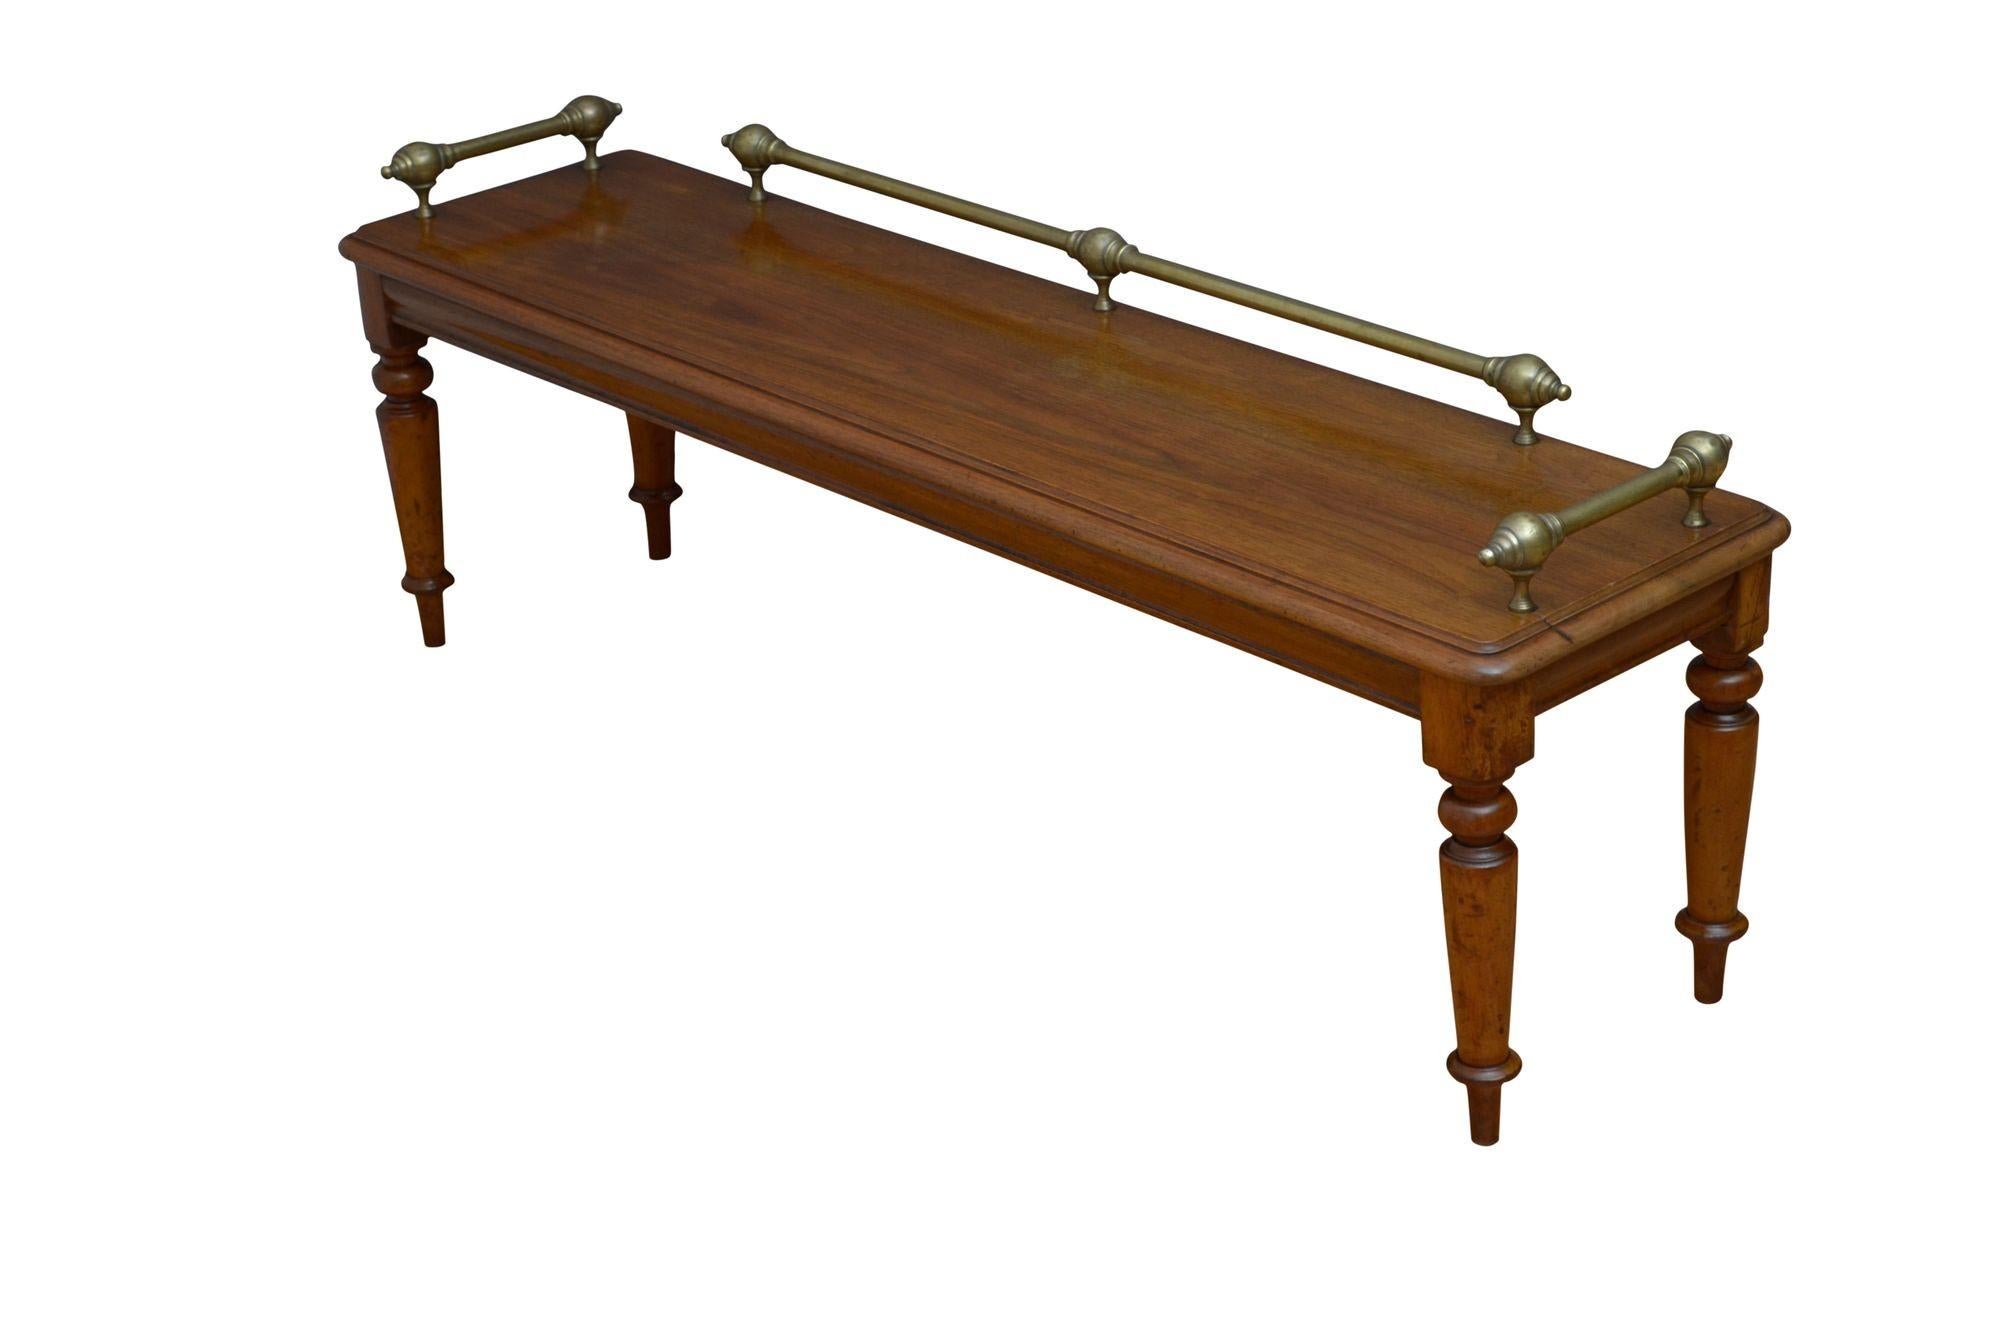 K0612 A superb Victorian hall seat in walnut, having decorative brass rails to the solid and figured walnut seat above shallow and shaped frieze, all standing on four turned and tapered legs. This antique bench oozes quality and it retains its